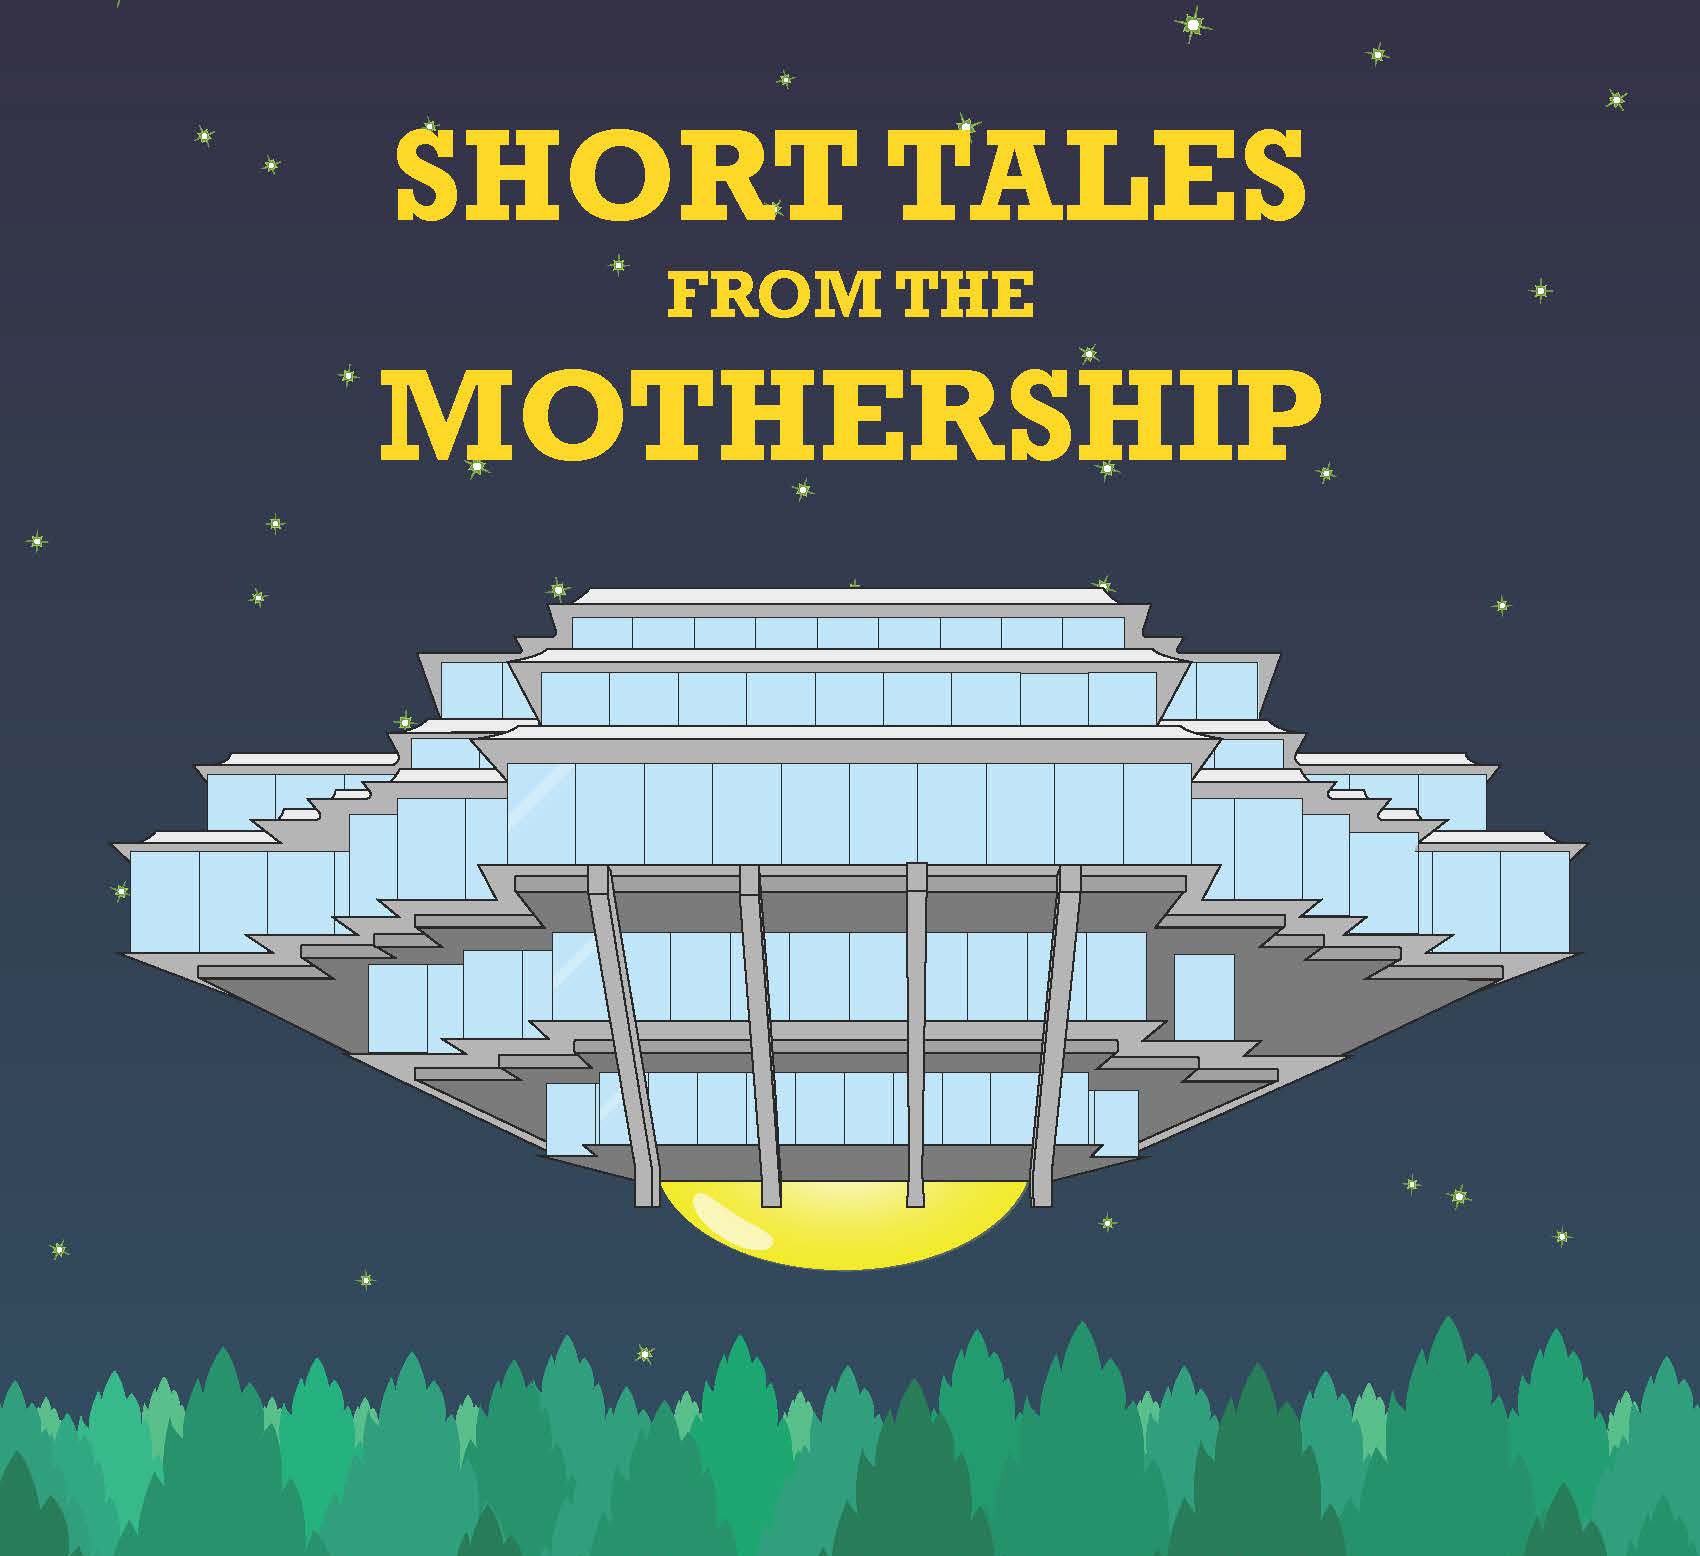 tales_from_the_mothership_rd-cropped